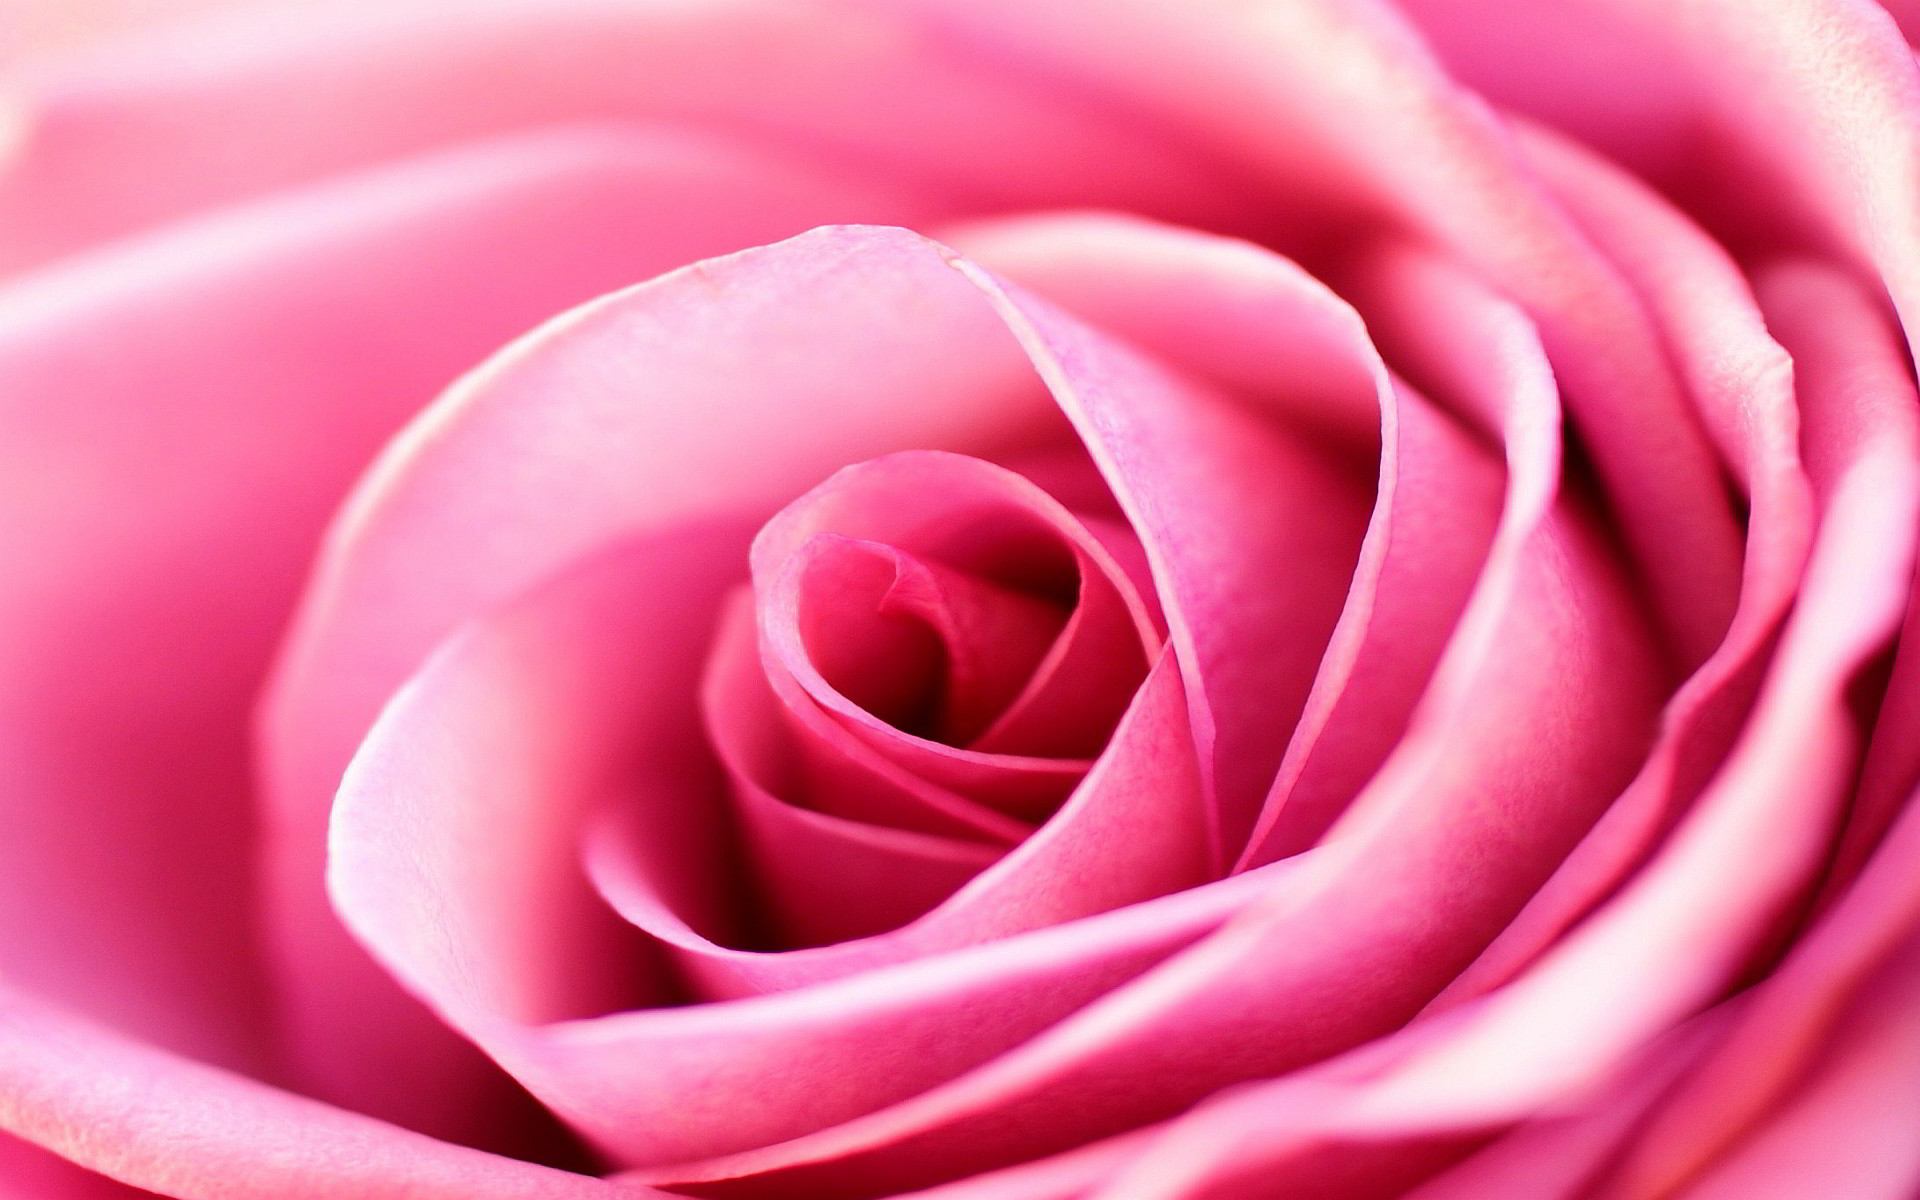 Light Pink Dark Roses Bouquet 4K HD Rose Wallpapers  HD Wallpapers  ID  62938